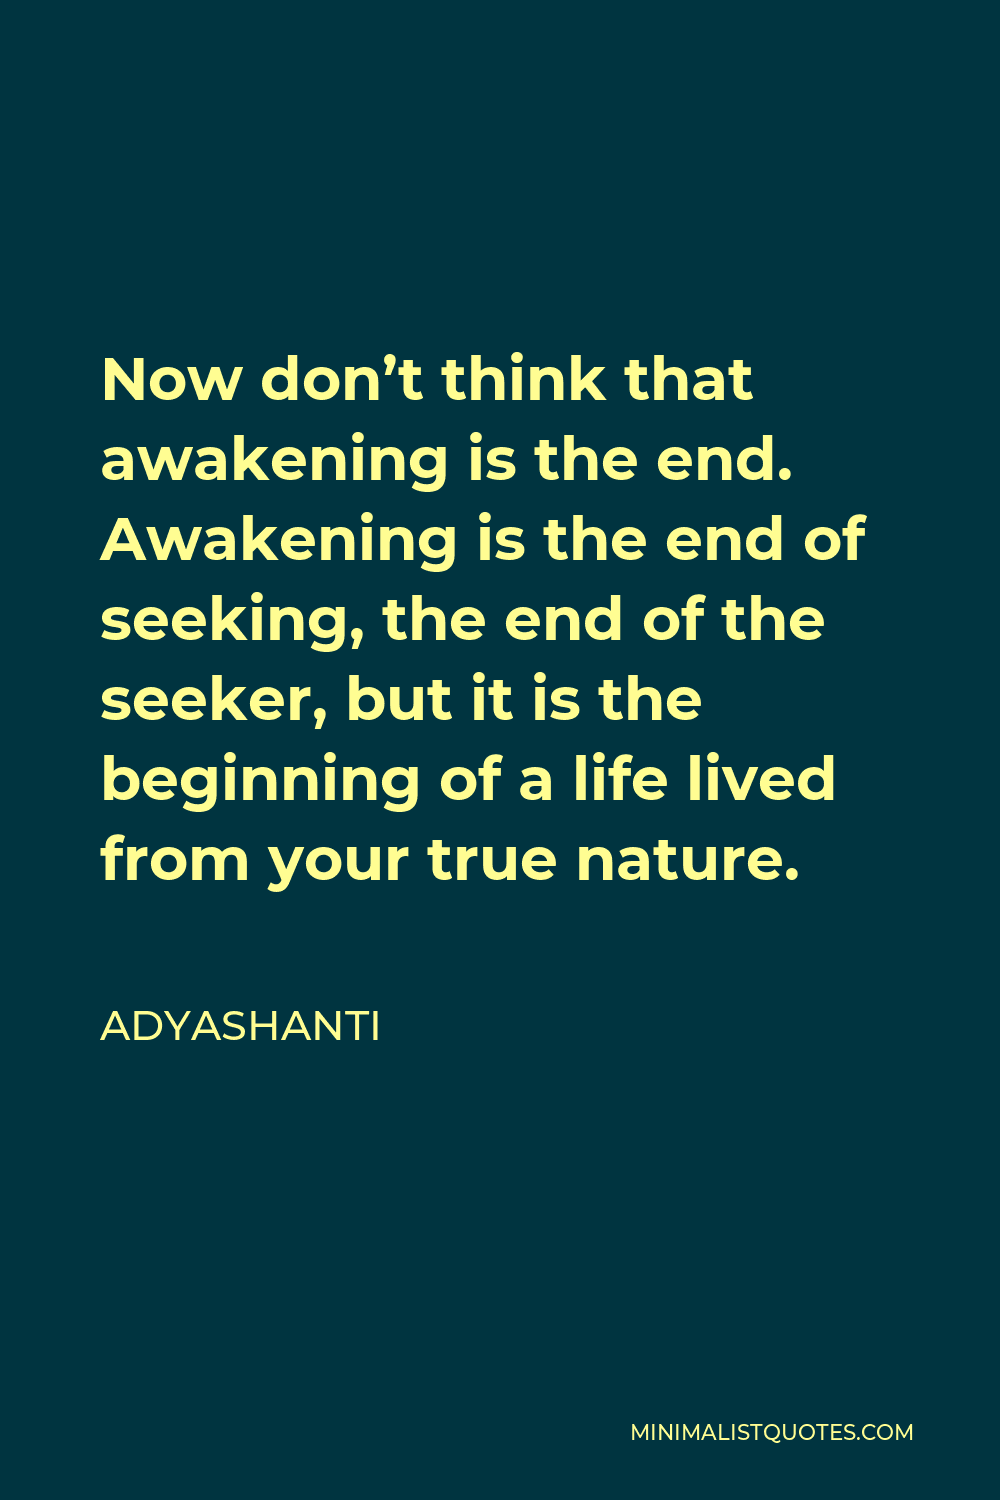 Adyashanti Quote - Now don’t think that awakening is the end. Awakening is the end of seeking, the end of the seeker, but it is the beginning of a life lived from your true nature.